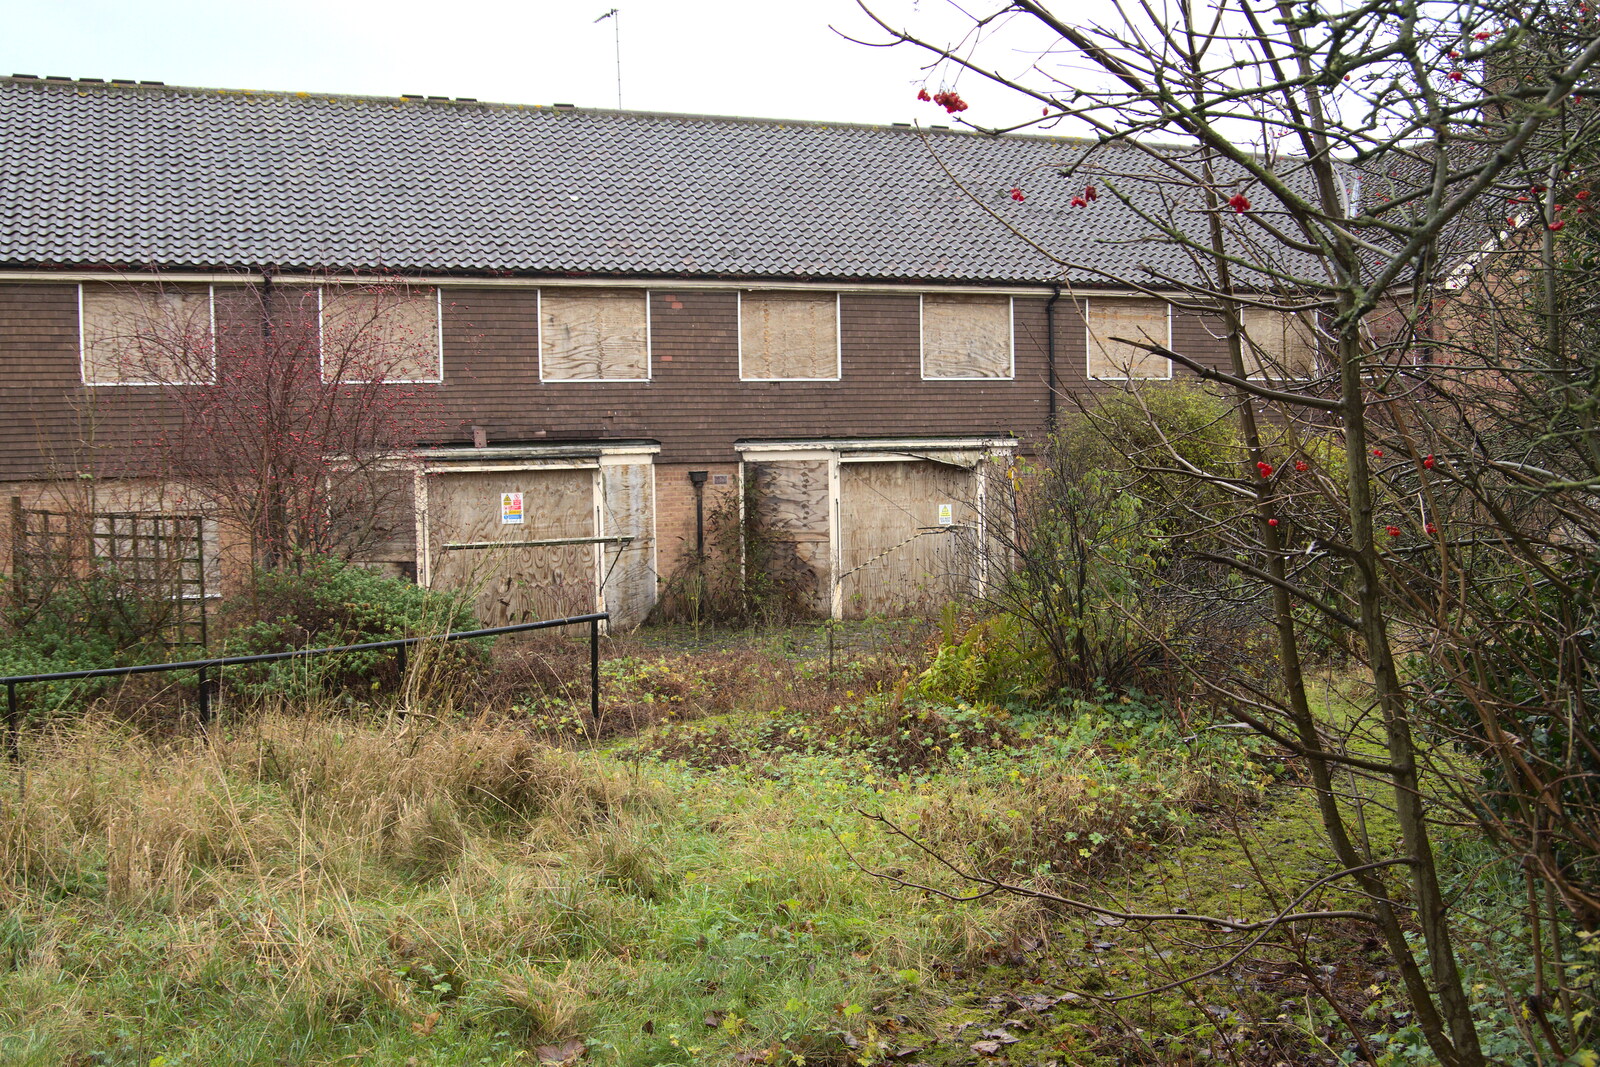 Paddock House is still derelict from New Year's Day, Brome, Suffolk - 1st January 2022